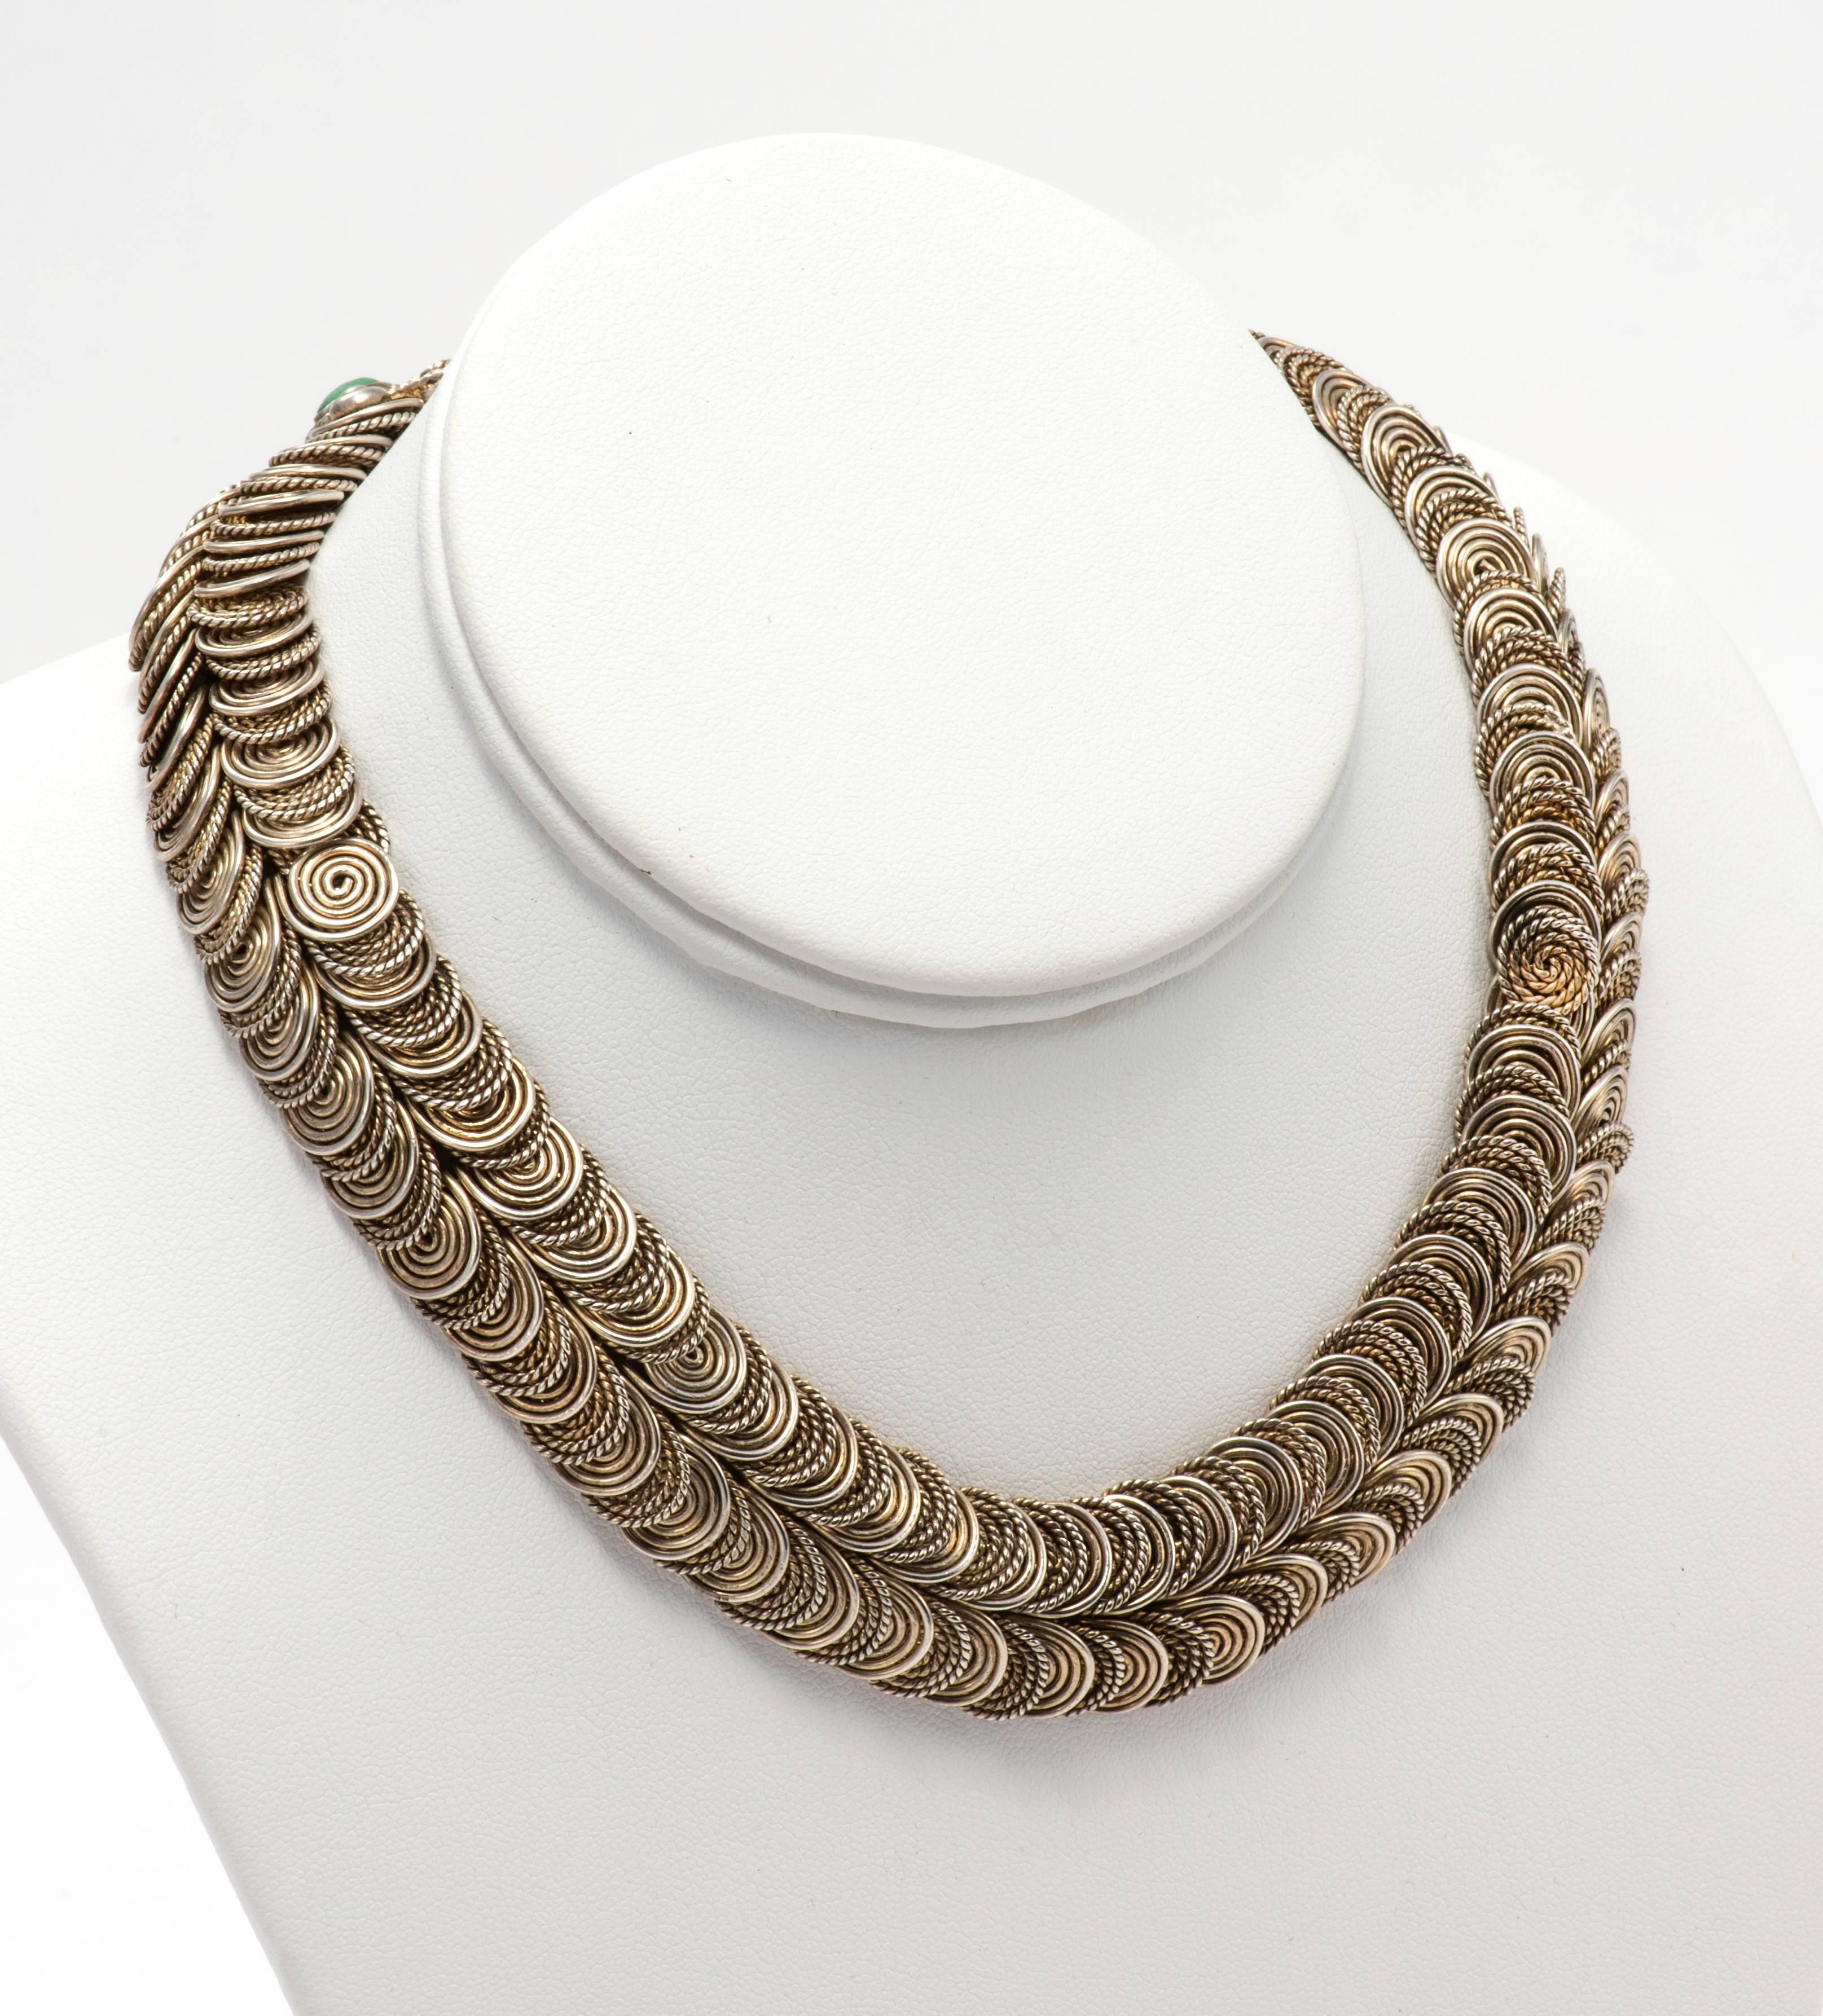 By Matilda Poulat.  C. 1950s.  Sinuous with movements, individual links in sterling silver.  Snake head clasp is adorned with setting of turquoise and coral.  
Great feel and weight.  128g.  15,5